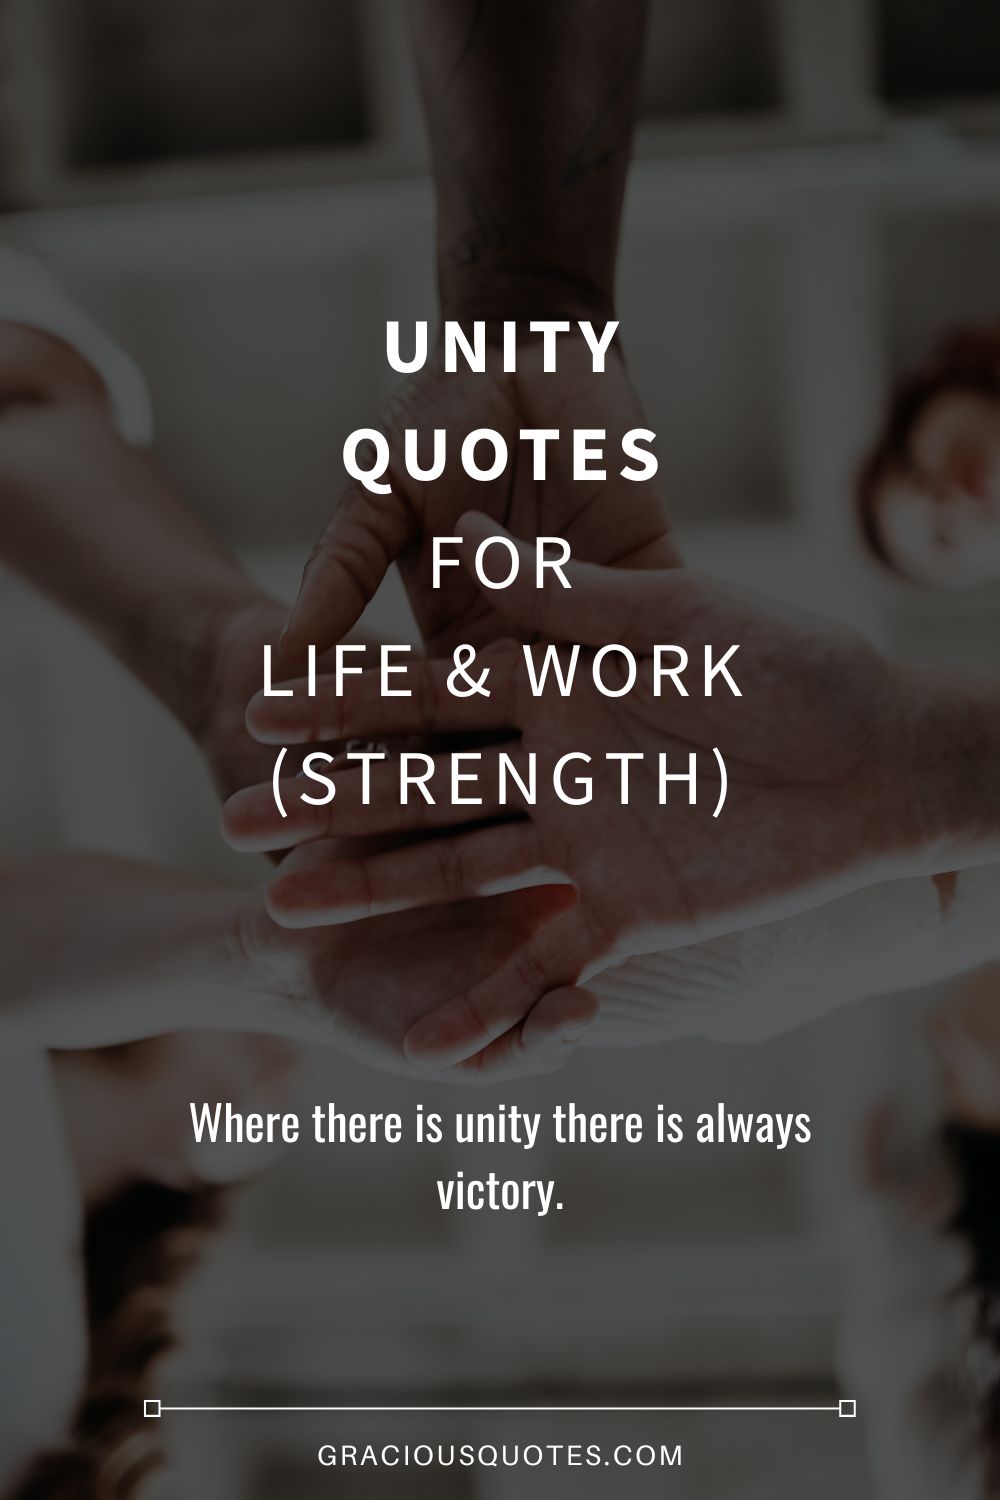 Unity Quotes for Life & Work (STRENGTH) - Gracious Quotes